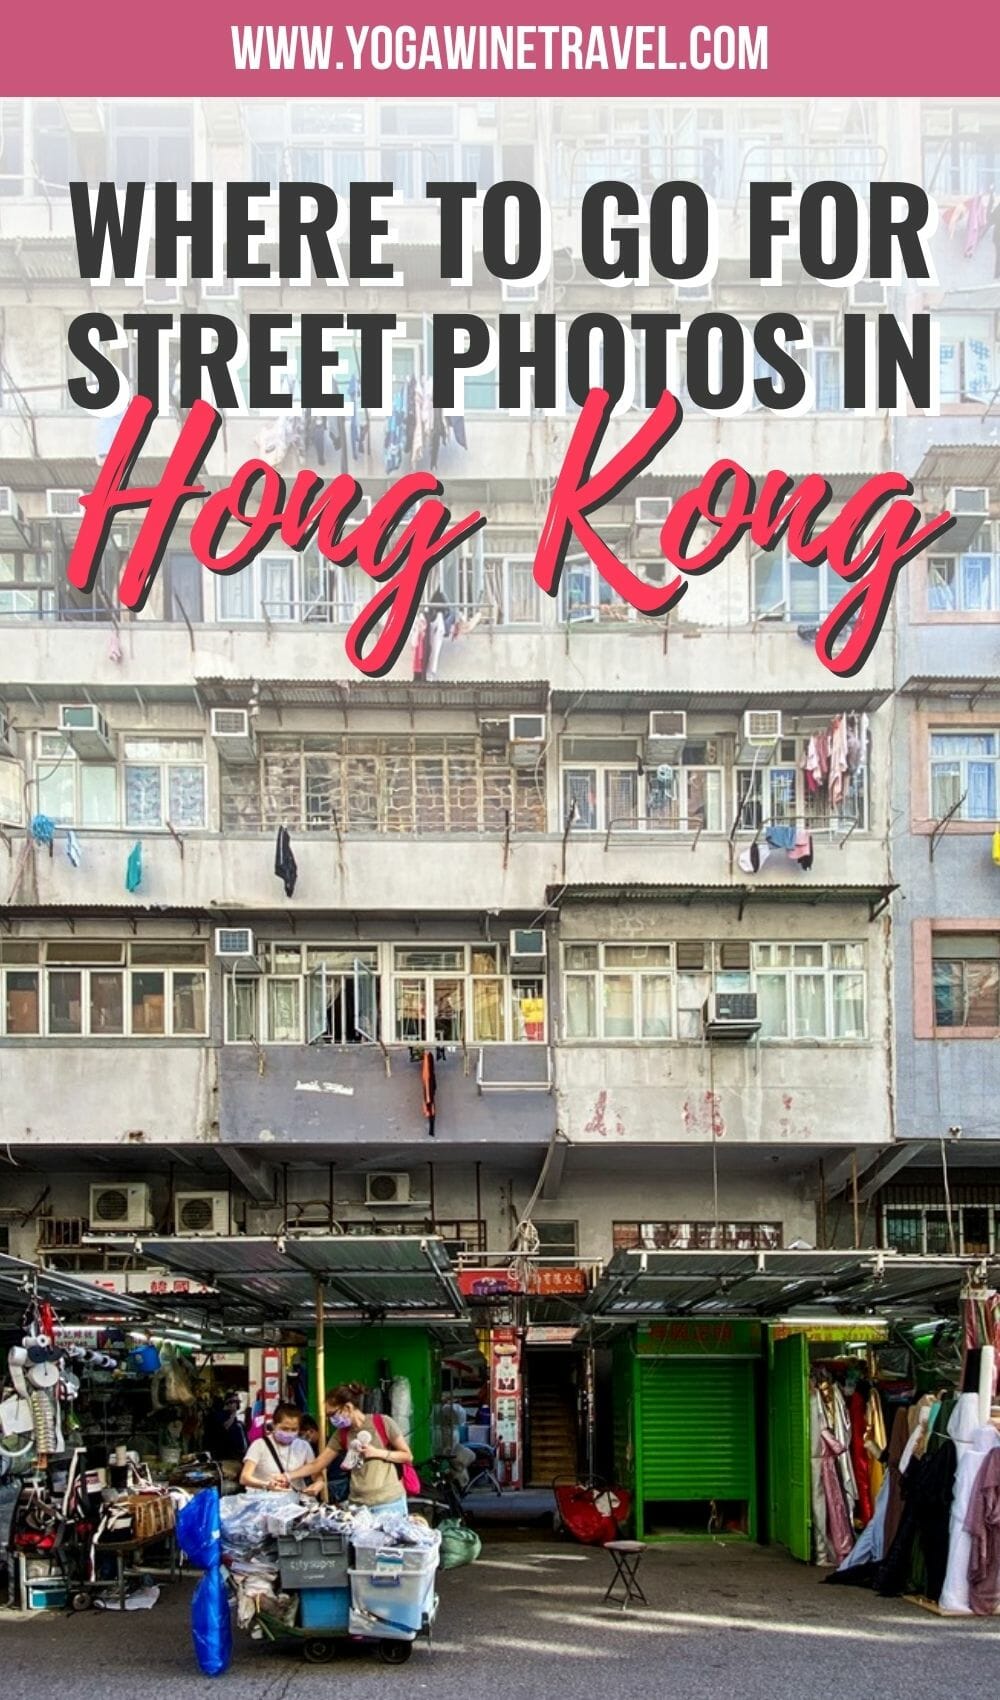 Old buildings in Hong Kong with text overlay